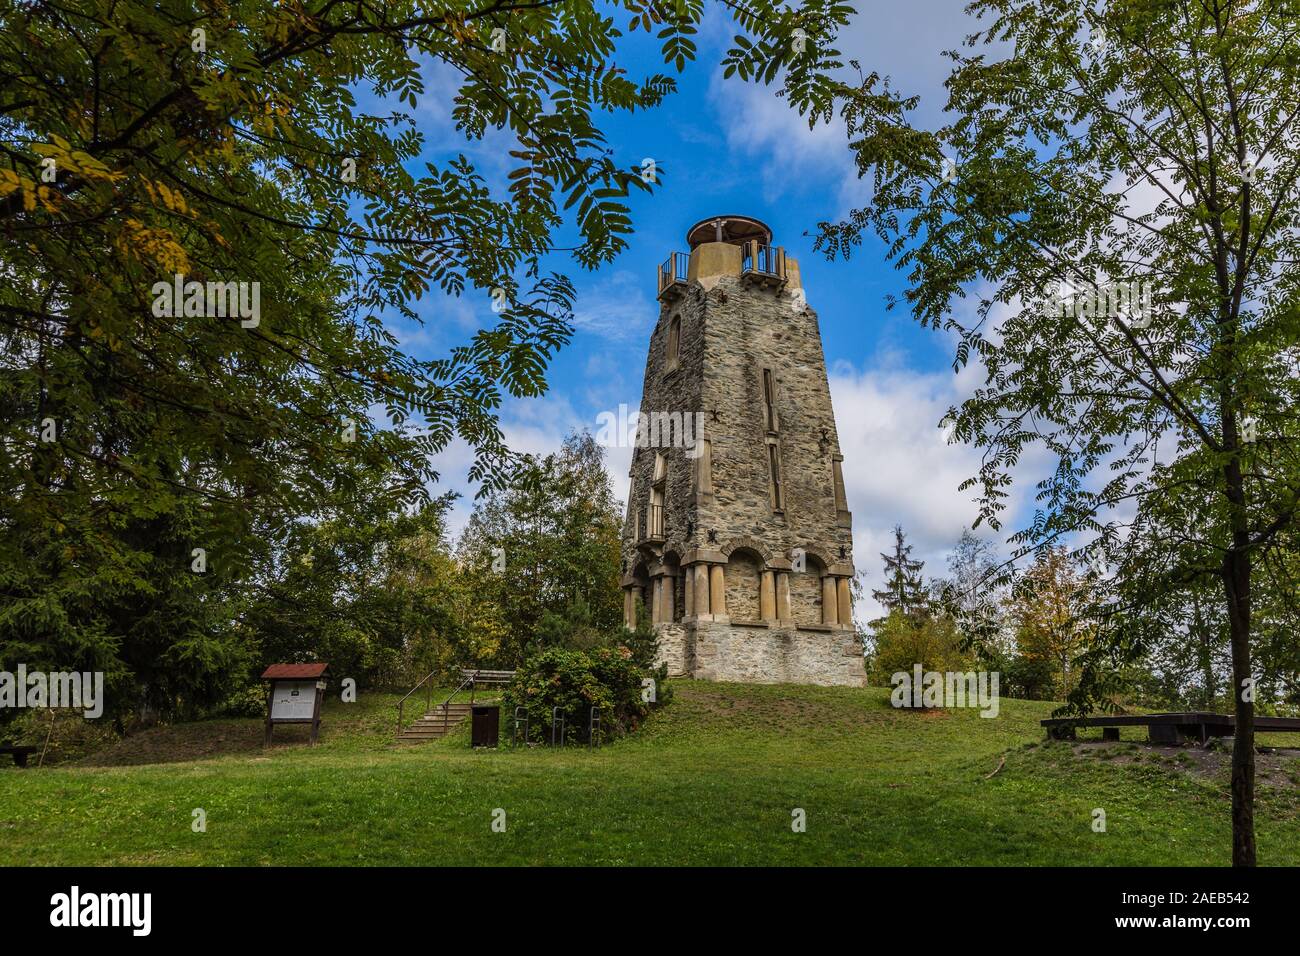 Zelena hora, Pelhrimov / Czech Republic - September 13 2019: Bismarck tower made of stone standing on a hill close to Cheb surrounded with green trees. Stock Photo